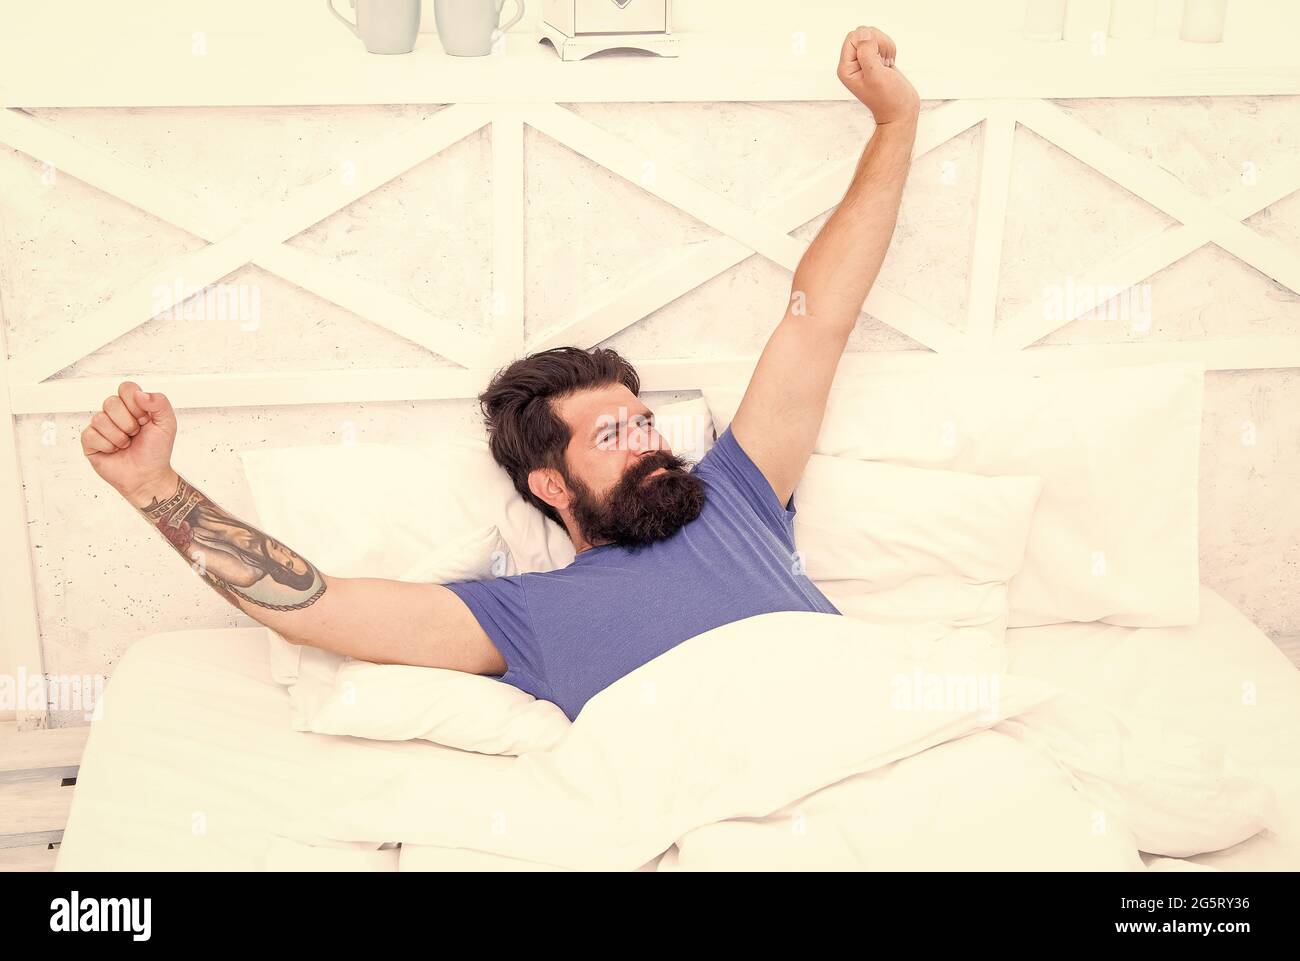 Nice morning. lazy sunday. bed time routine. brutal male stretching. relax lifestyle concept. bearded man in bed. early wake up at morning. bachelor Stock Photo